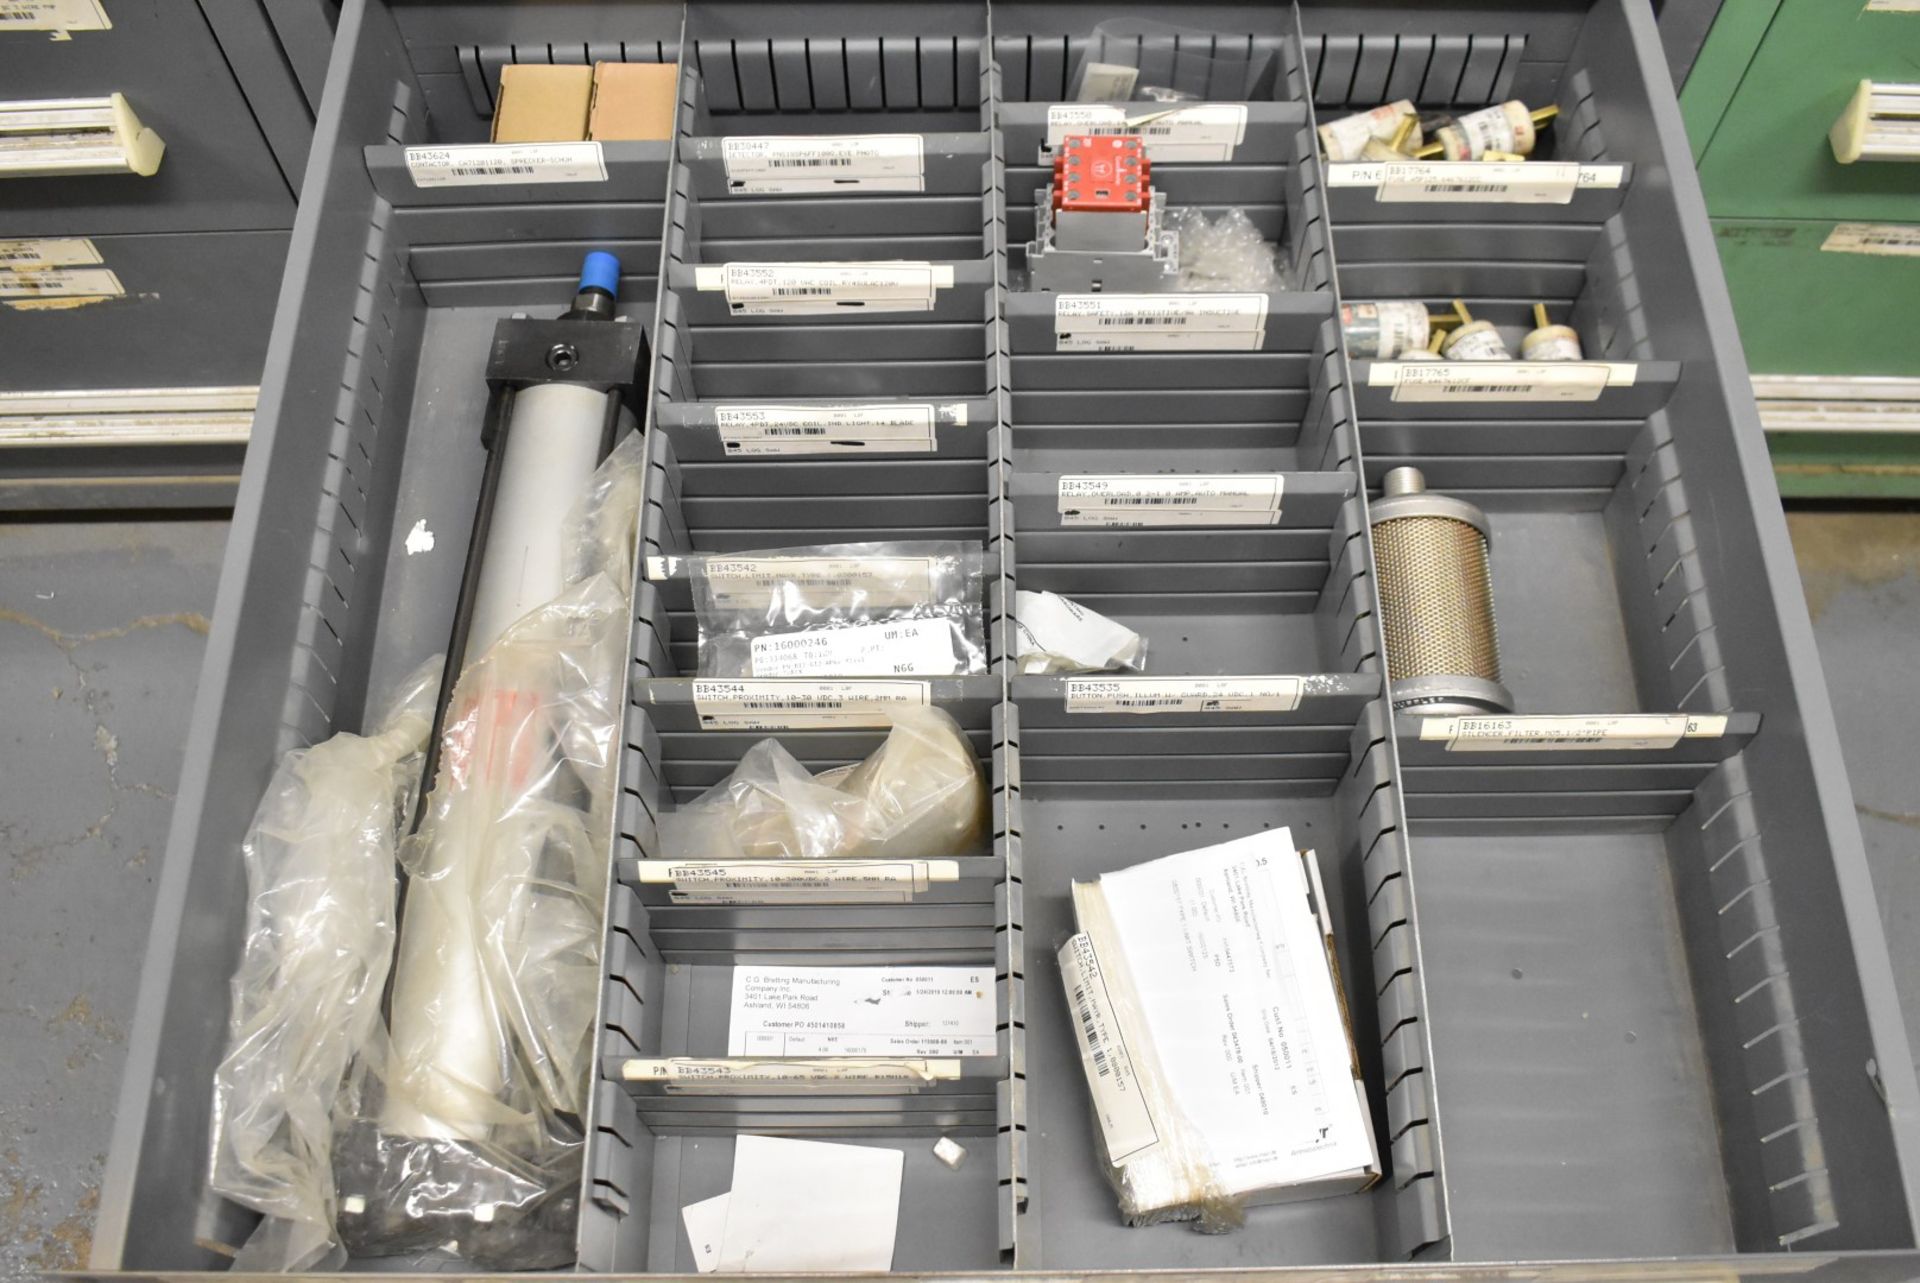 LOT/ CONTENTS OF CABINET - INCLUDING SENSOR COMPONENTS, PRINTED CIRCUIT BOARDS, GRINDING WHEELS, - Bild 6 aus 6